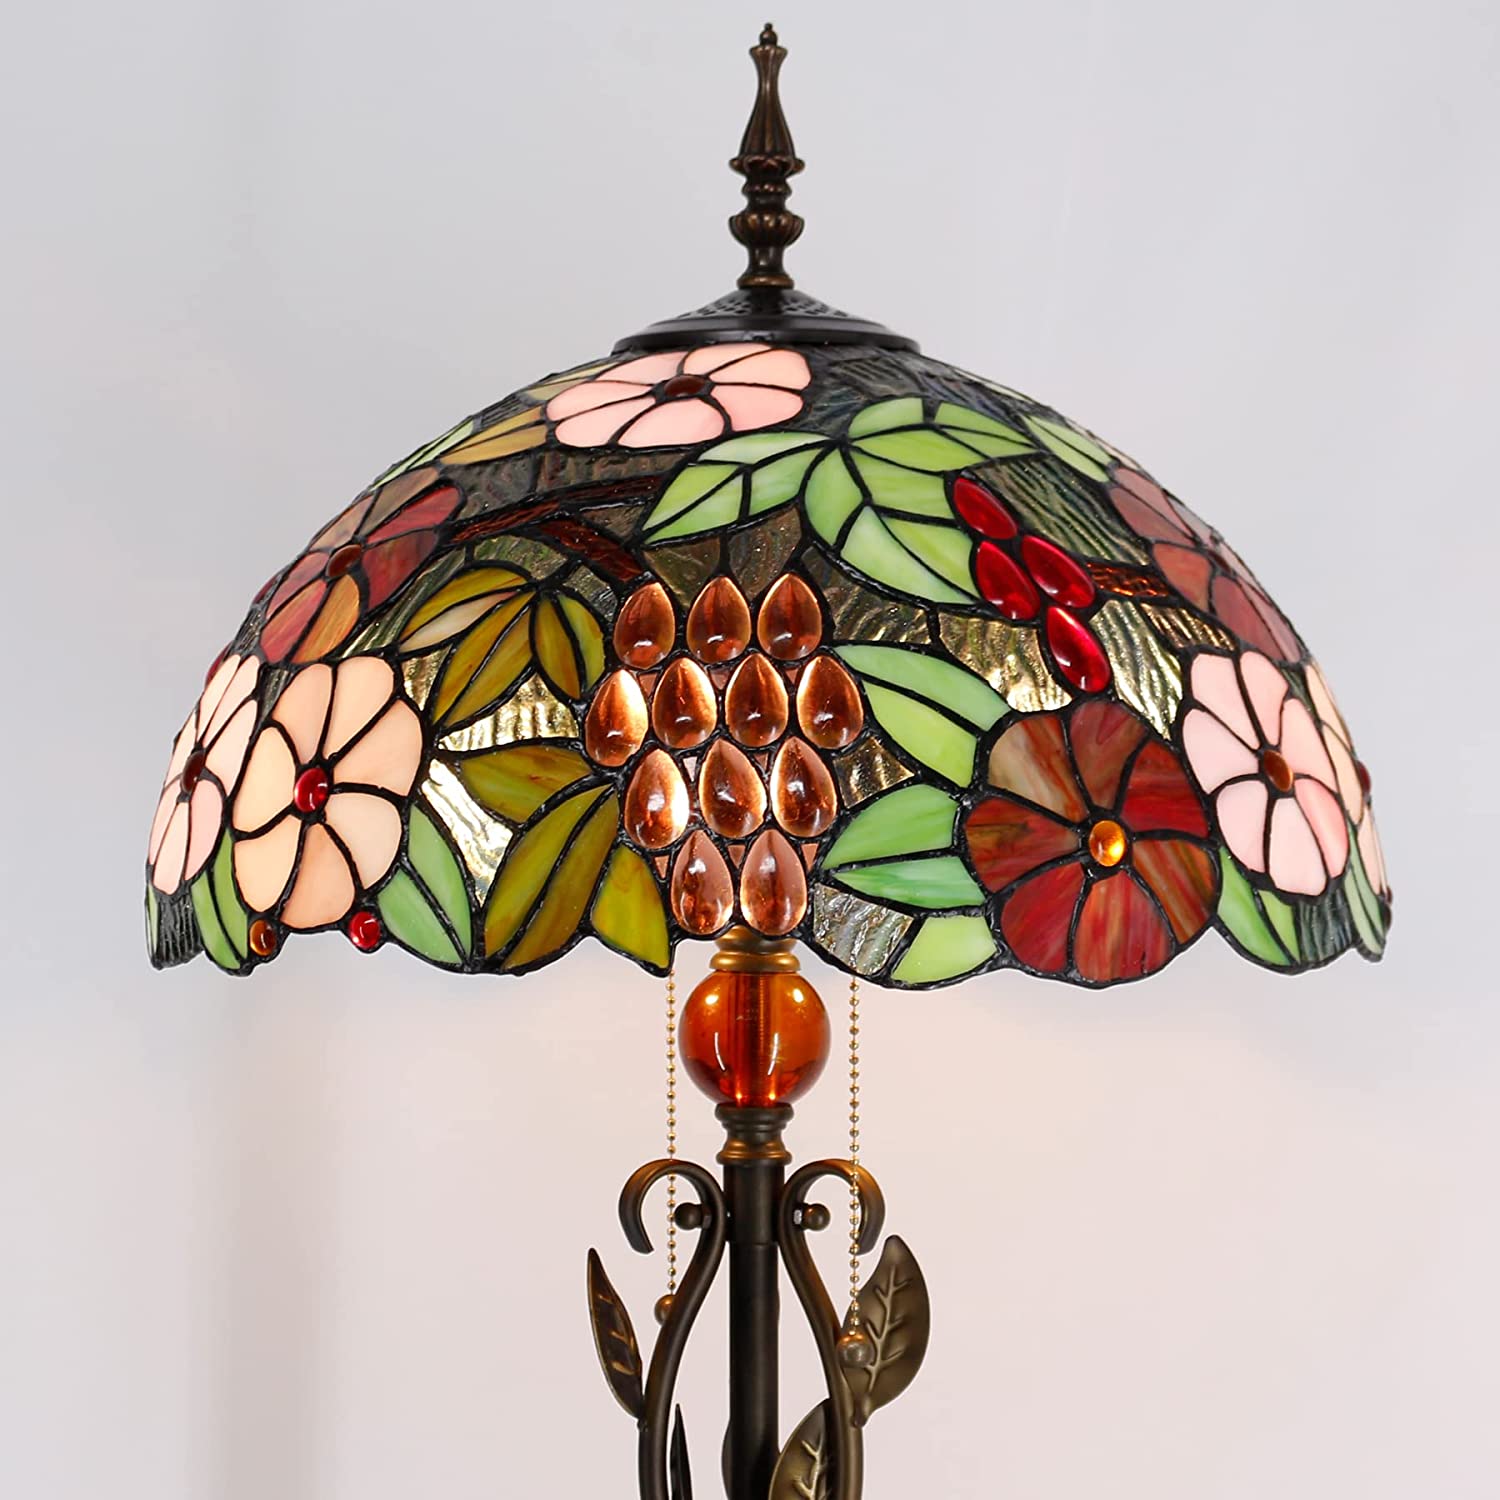 Tiffany Floor Lamp Stained Glass Green Grape Stainding Light W16H70 Inch Iron Metal Leaves Bronze Base